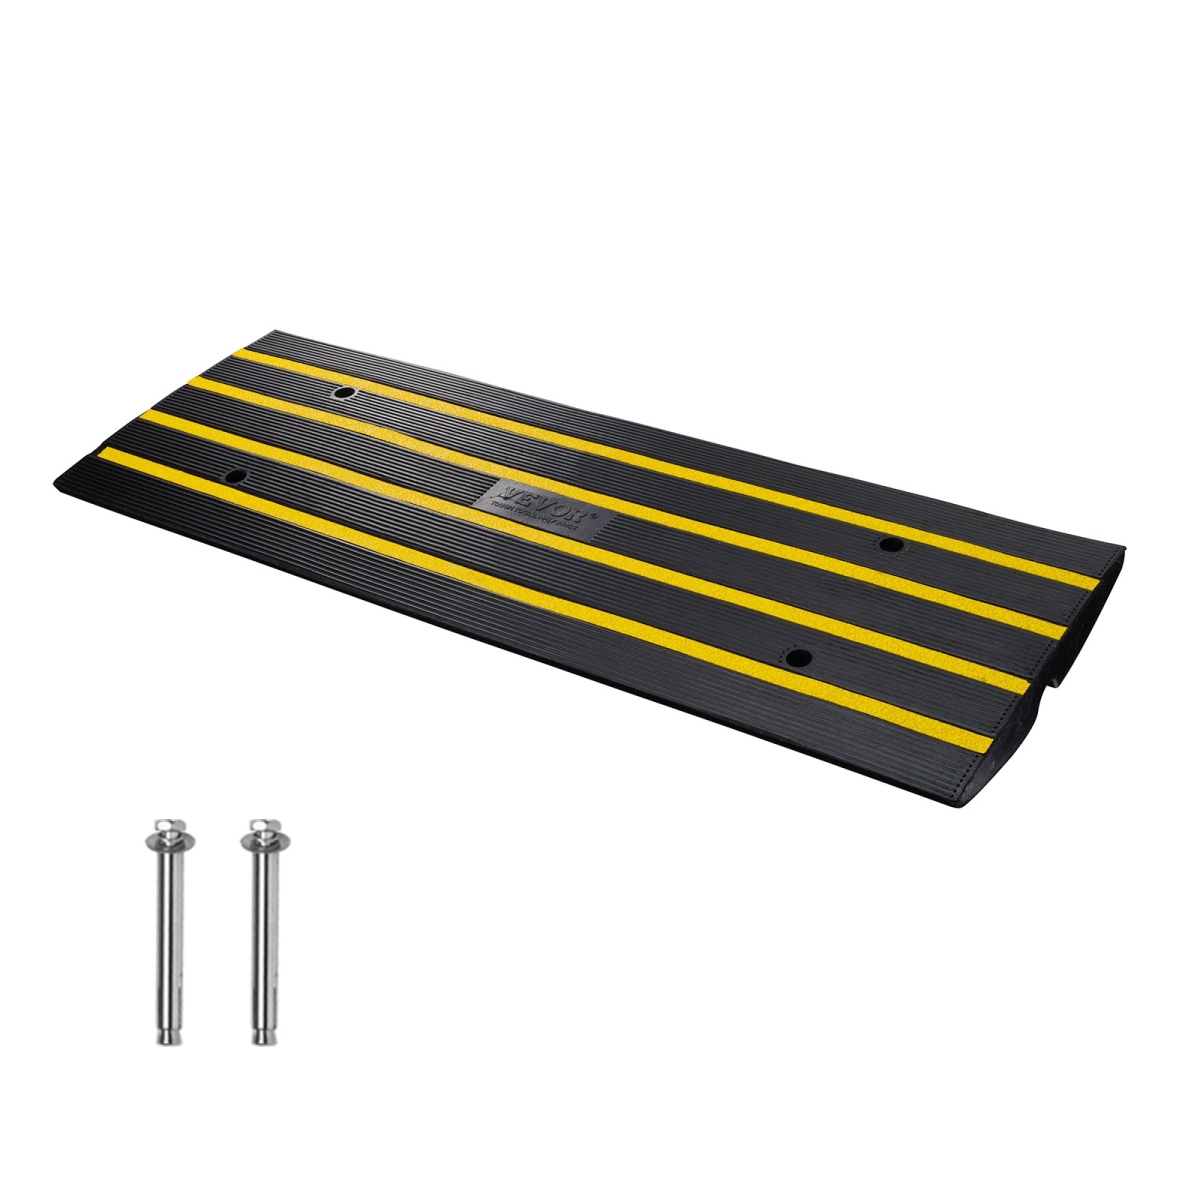 Picture of Vevor ZXDBLYPDGB148U6S1V0 15 Ton Rubber Curb Ramp for Driveway